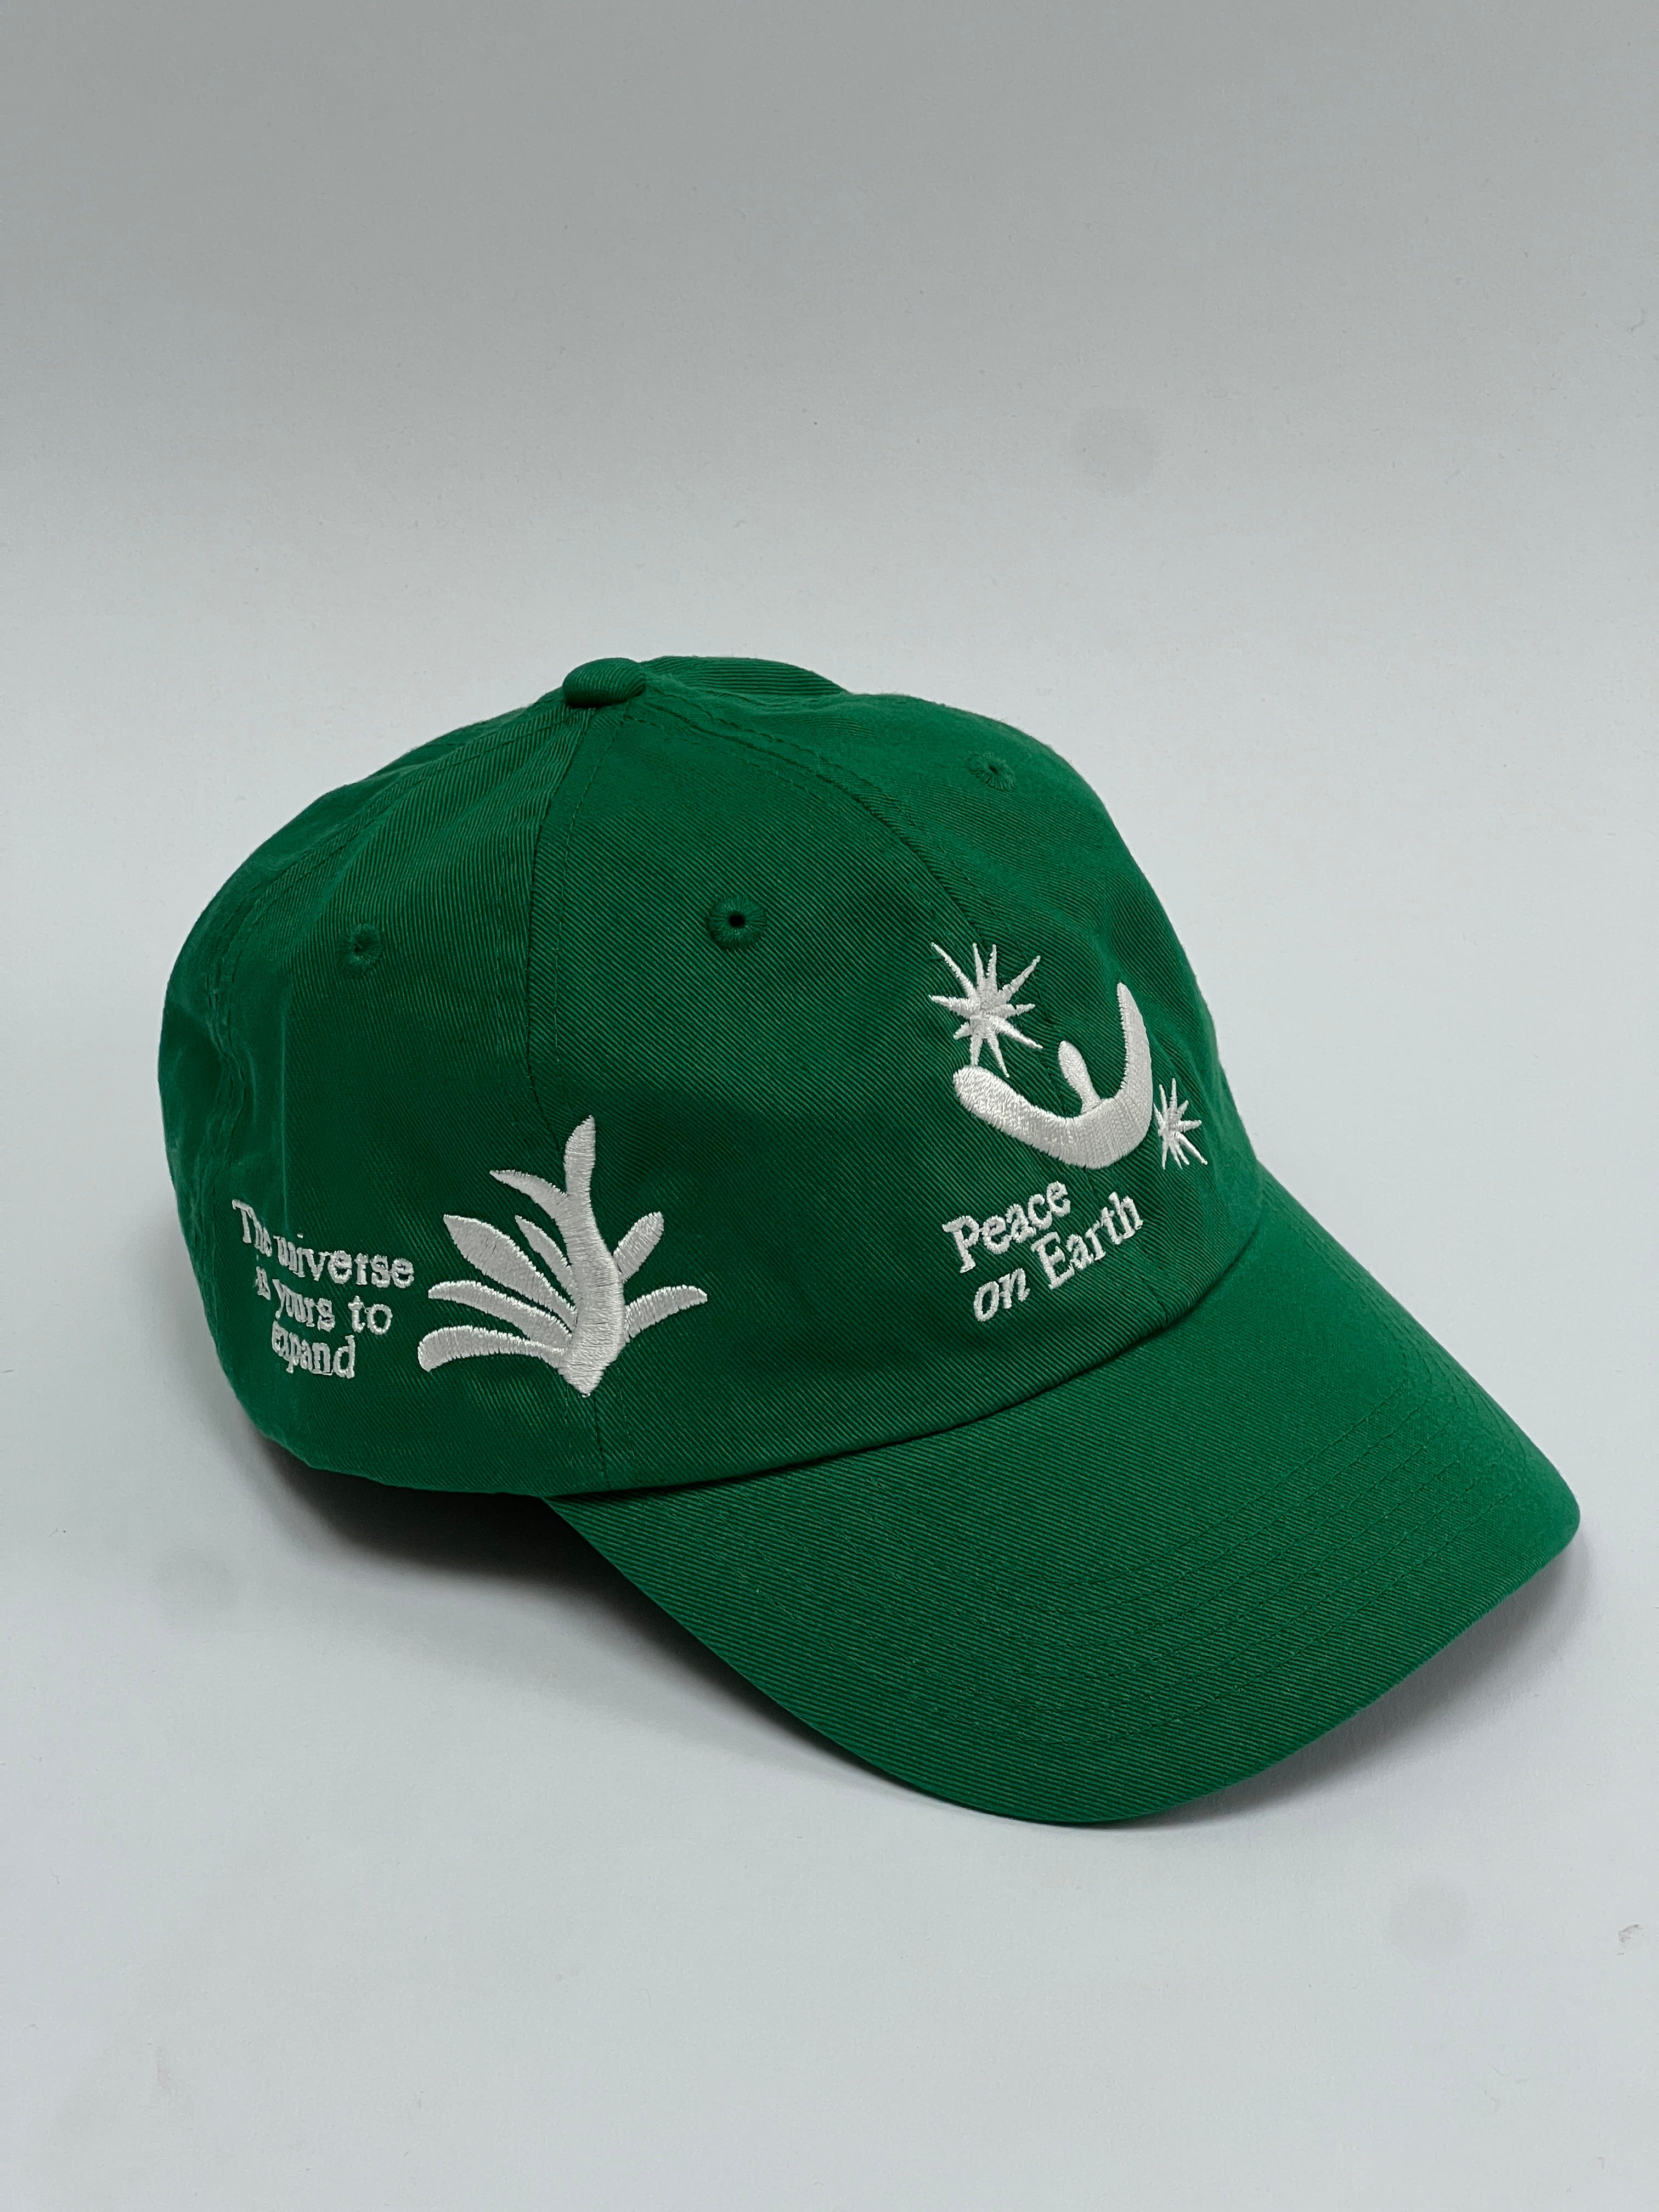 Palo Studios Creation Hat / Available in Veggie